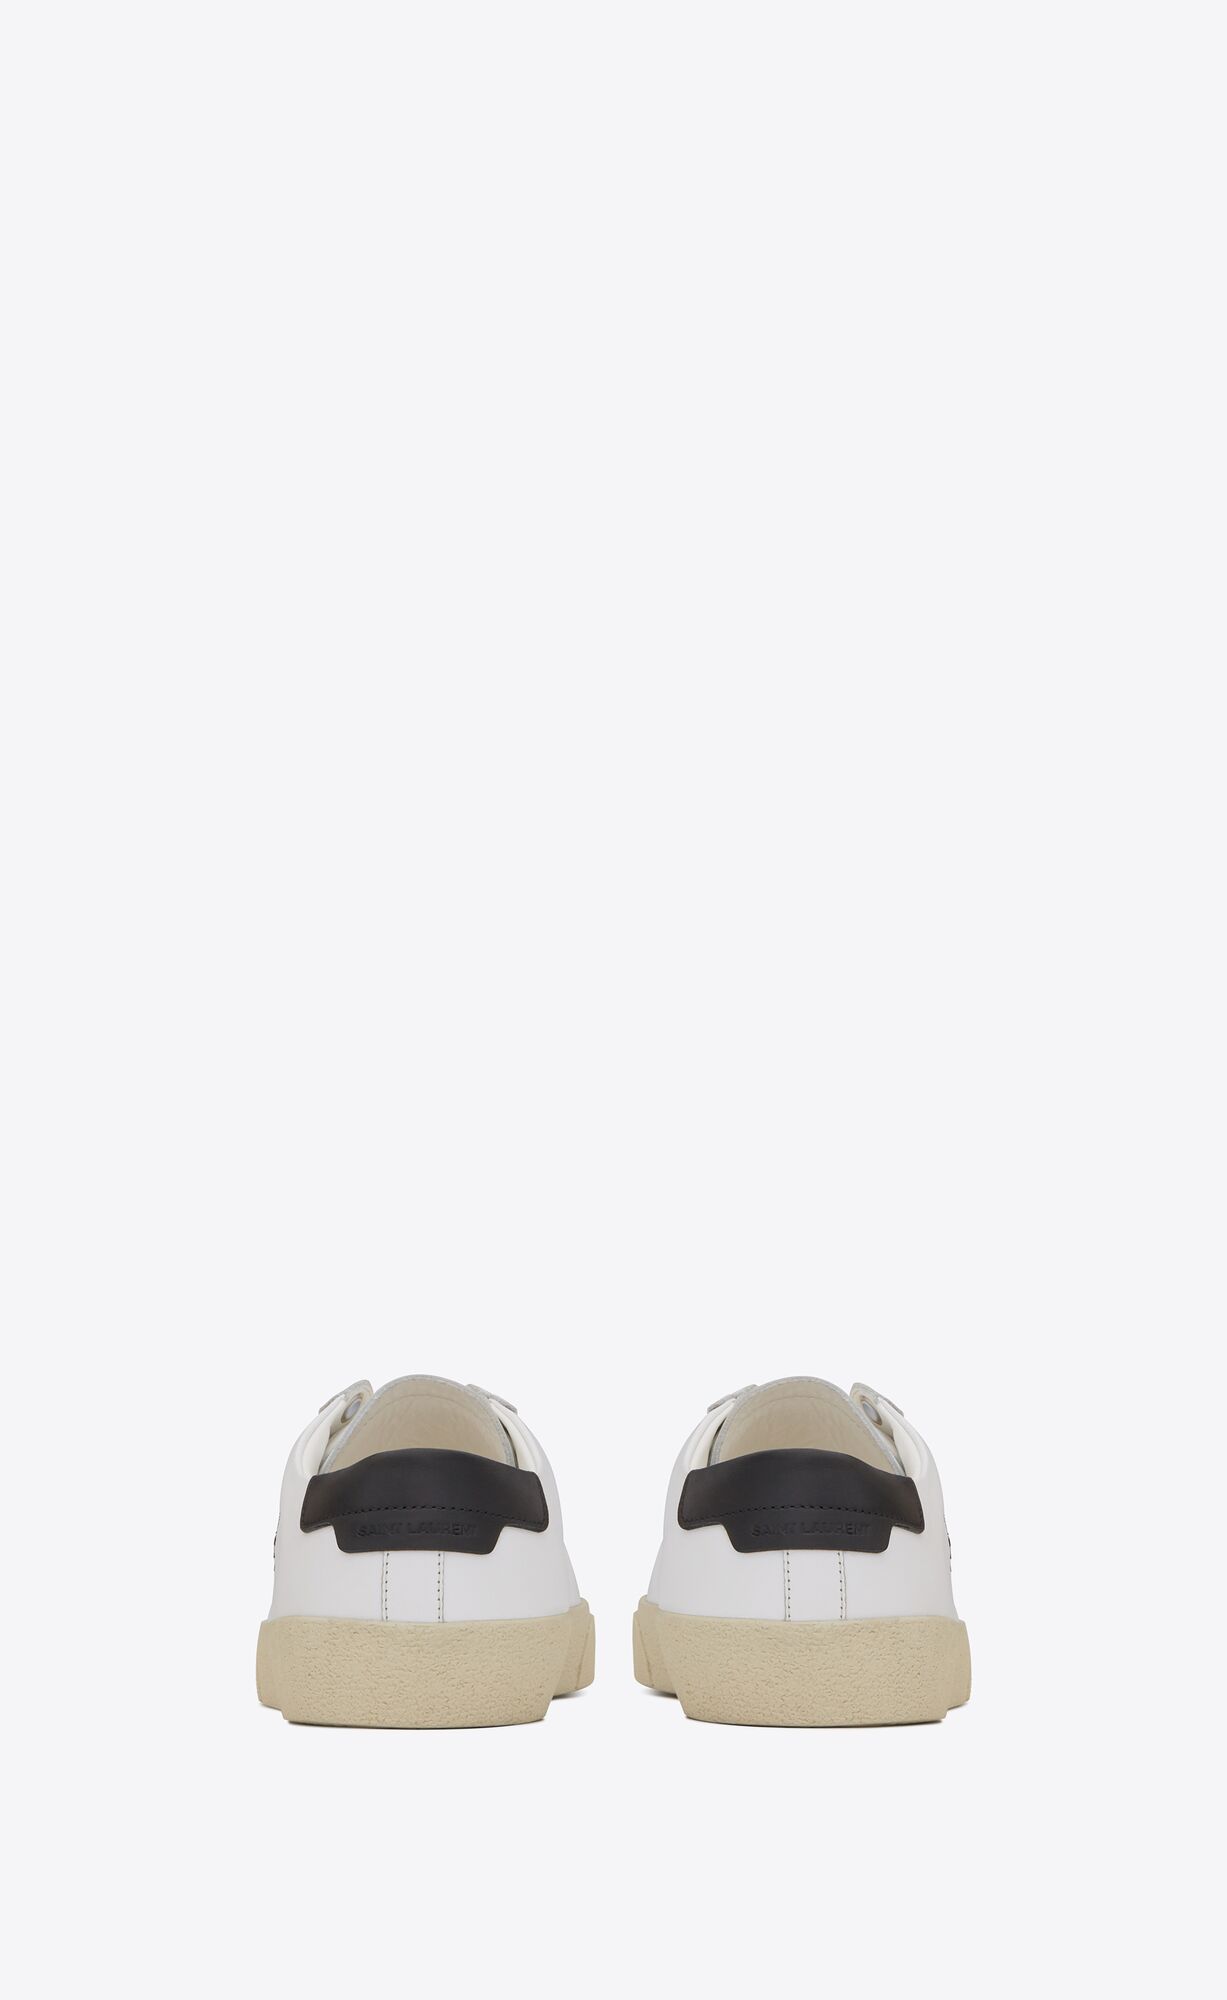 Court classic sl/06 embroidered sneakers in leather | Saint Laurent ...